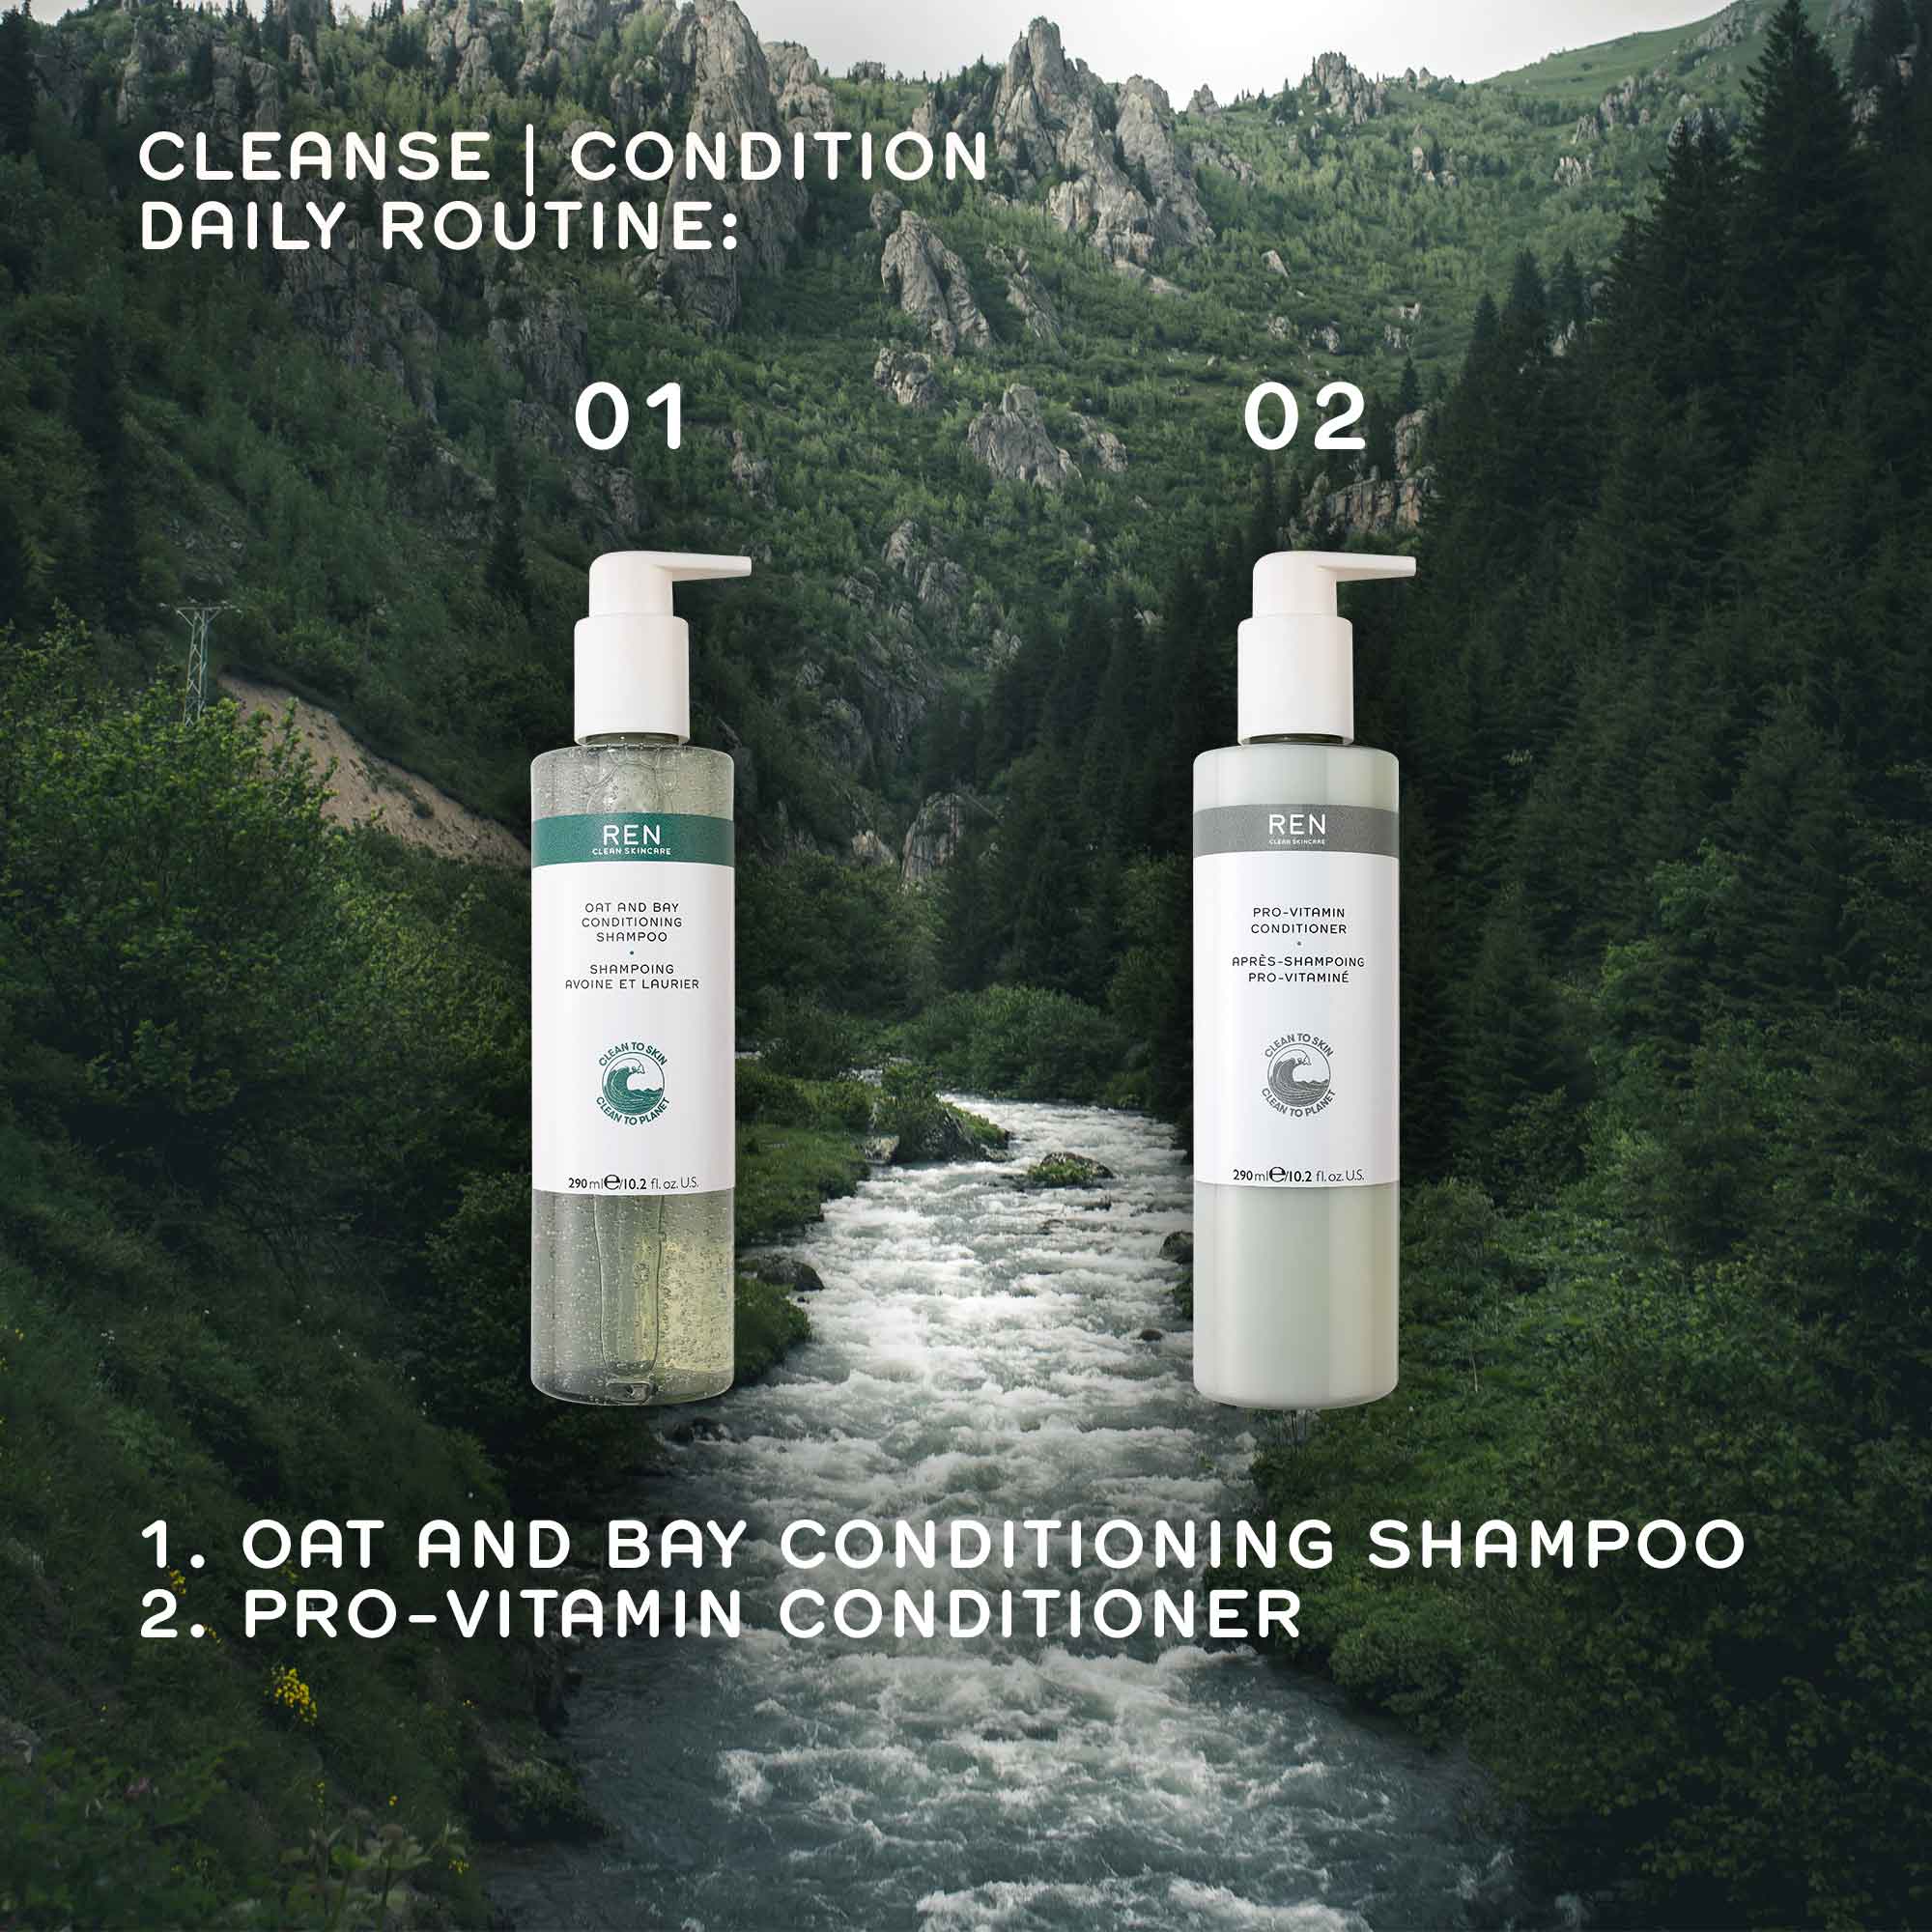 Oat and Bay Conditioning Shampoo